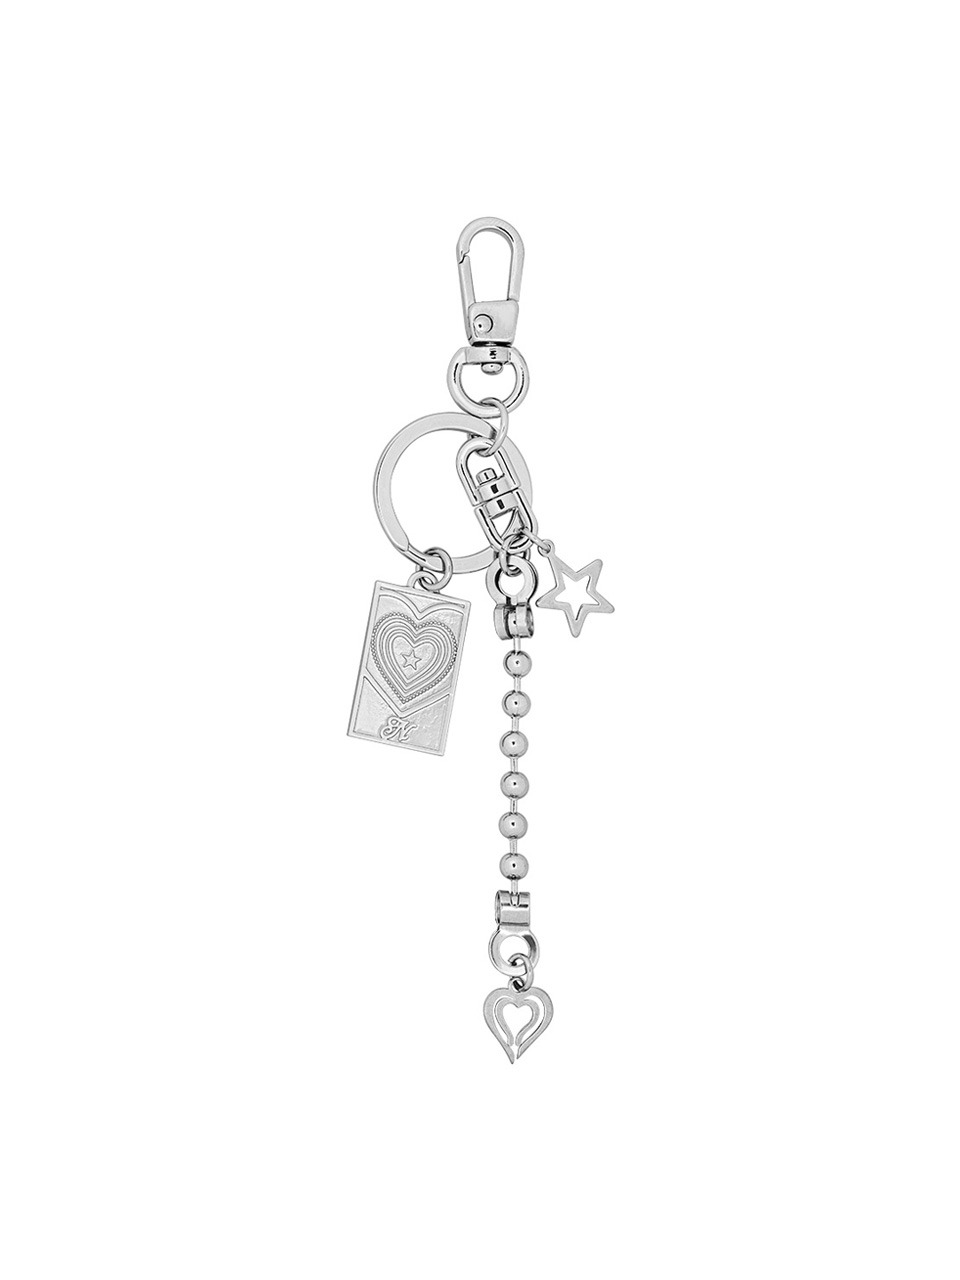 NFF - STAR IN HEART KEY RING (SLIVER)